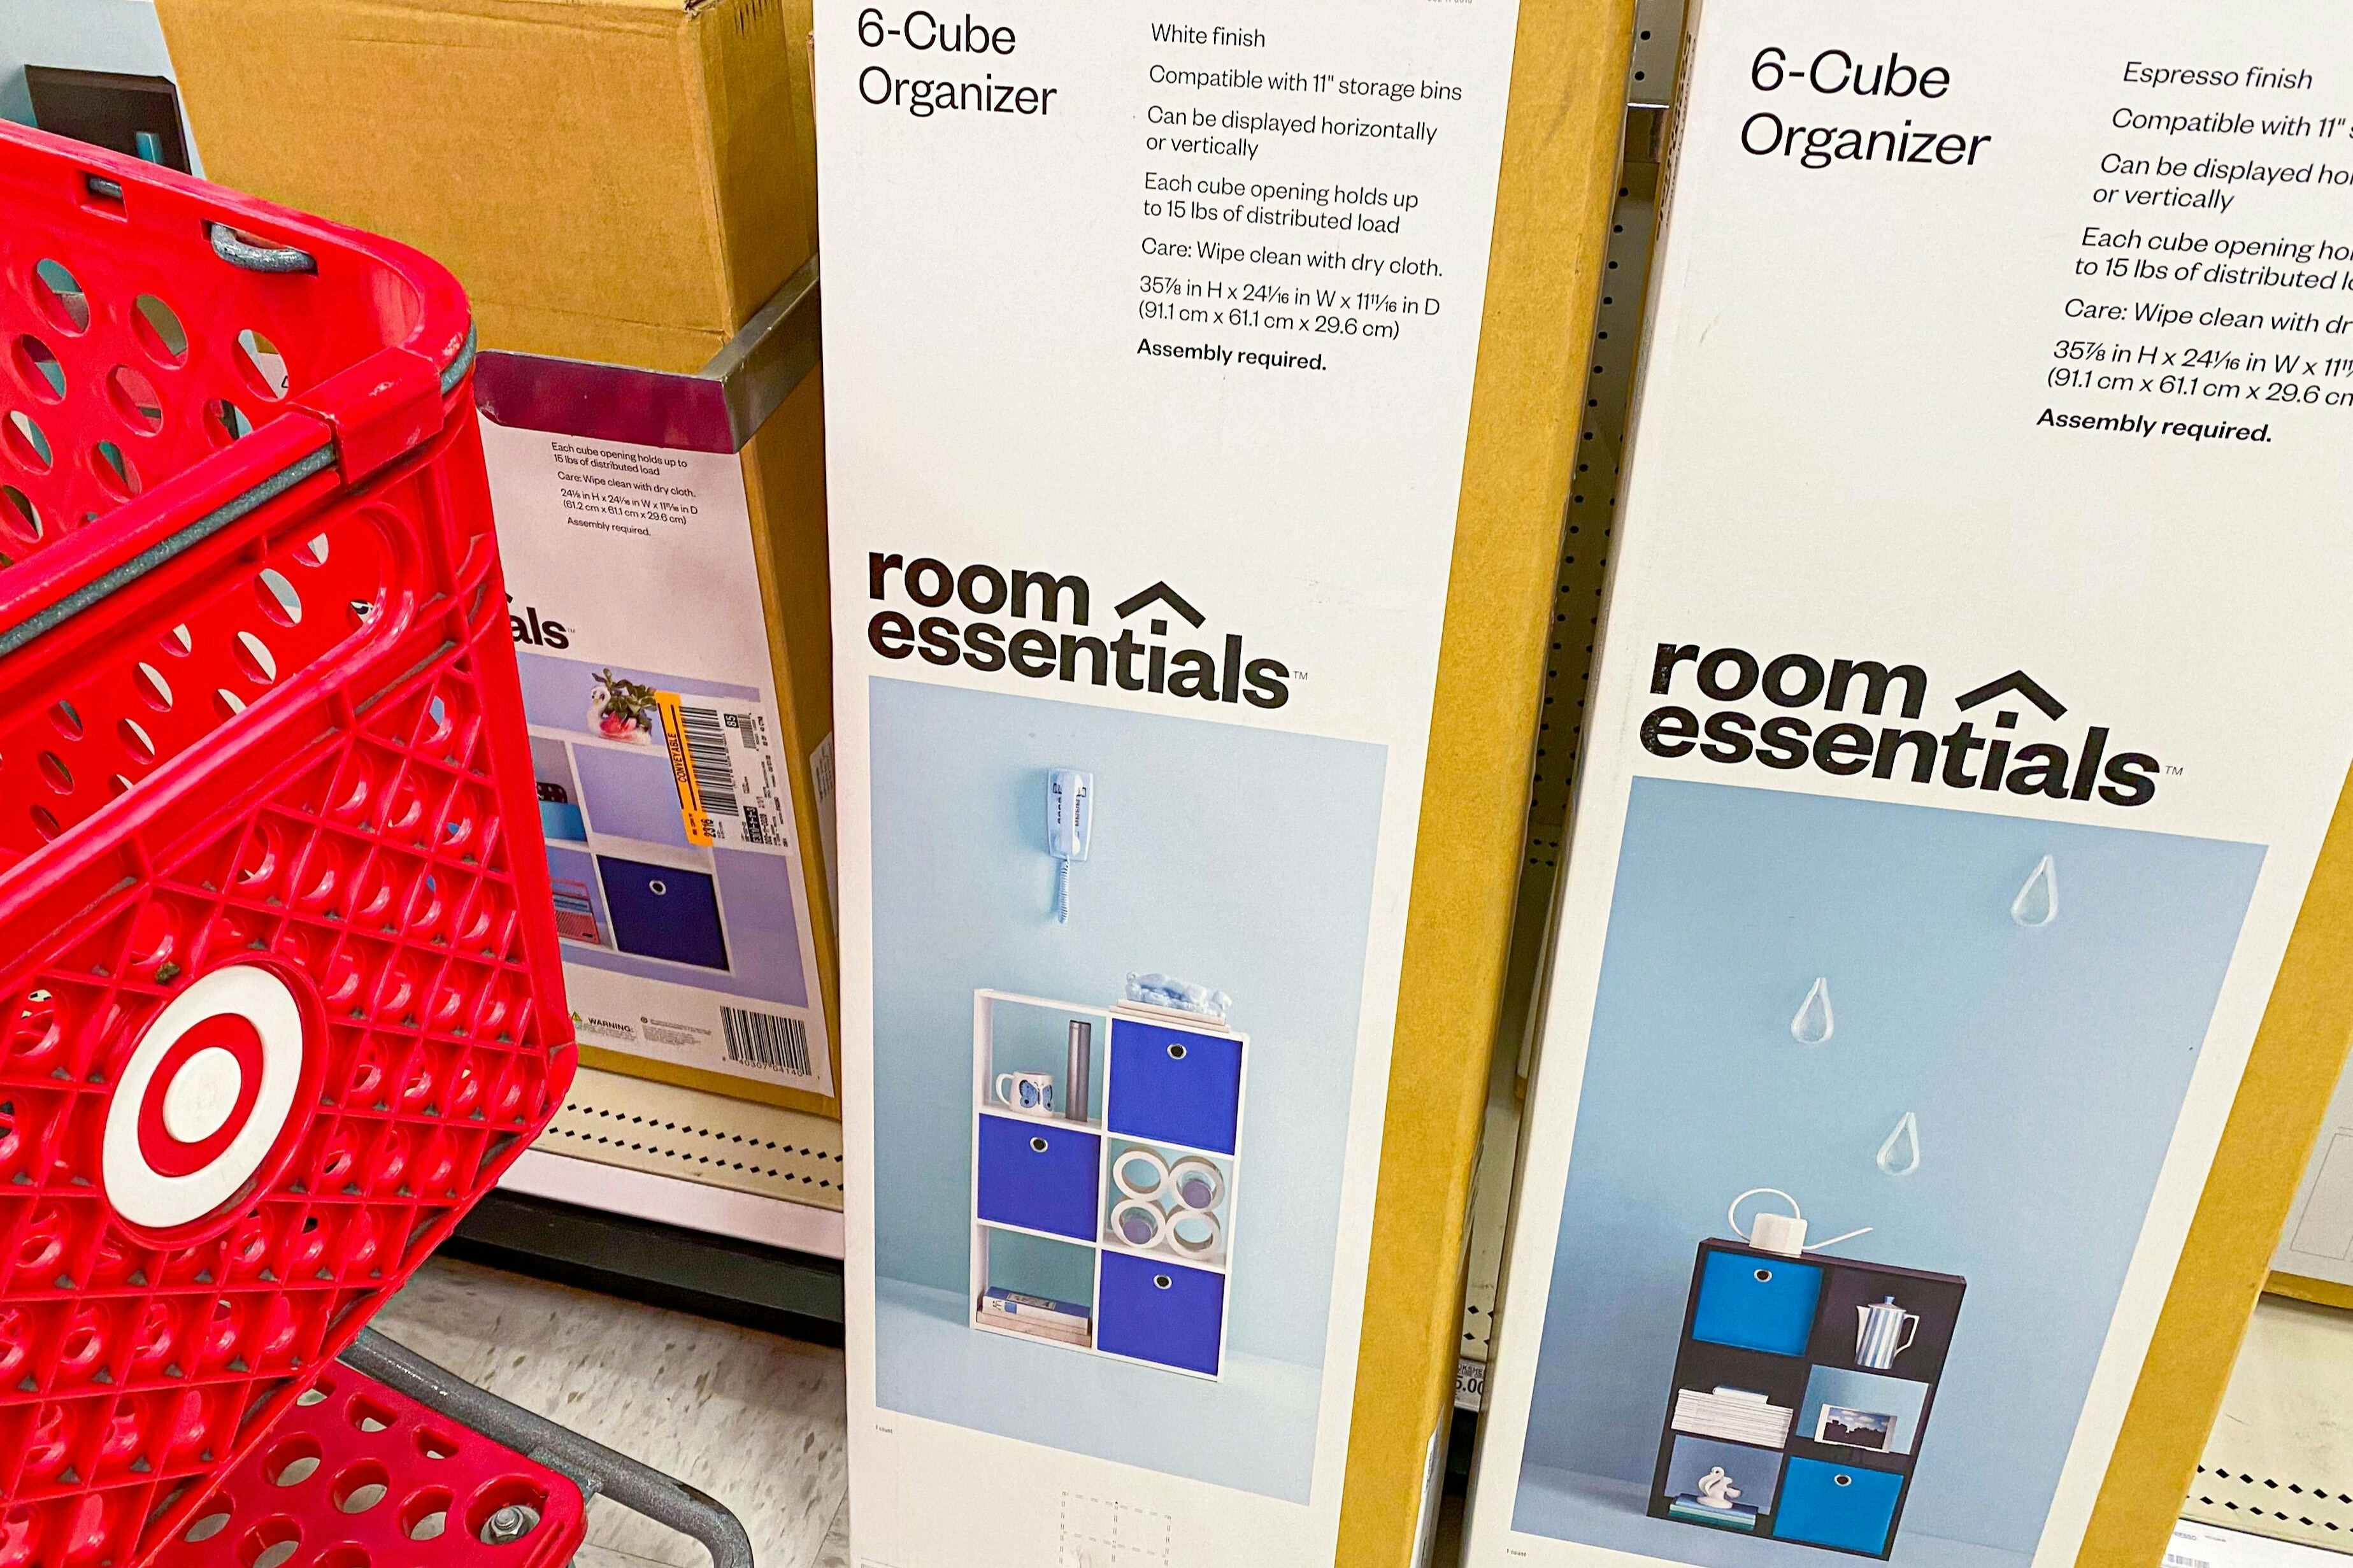 Cube Organizers on Sale at Target: $4 Bins and $19 Bookshelves